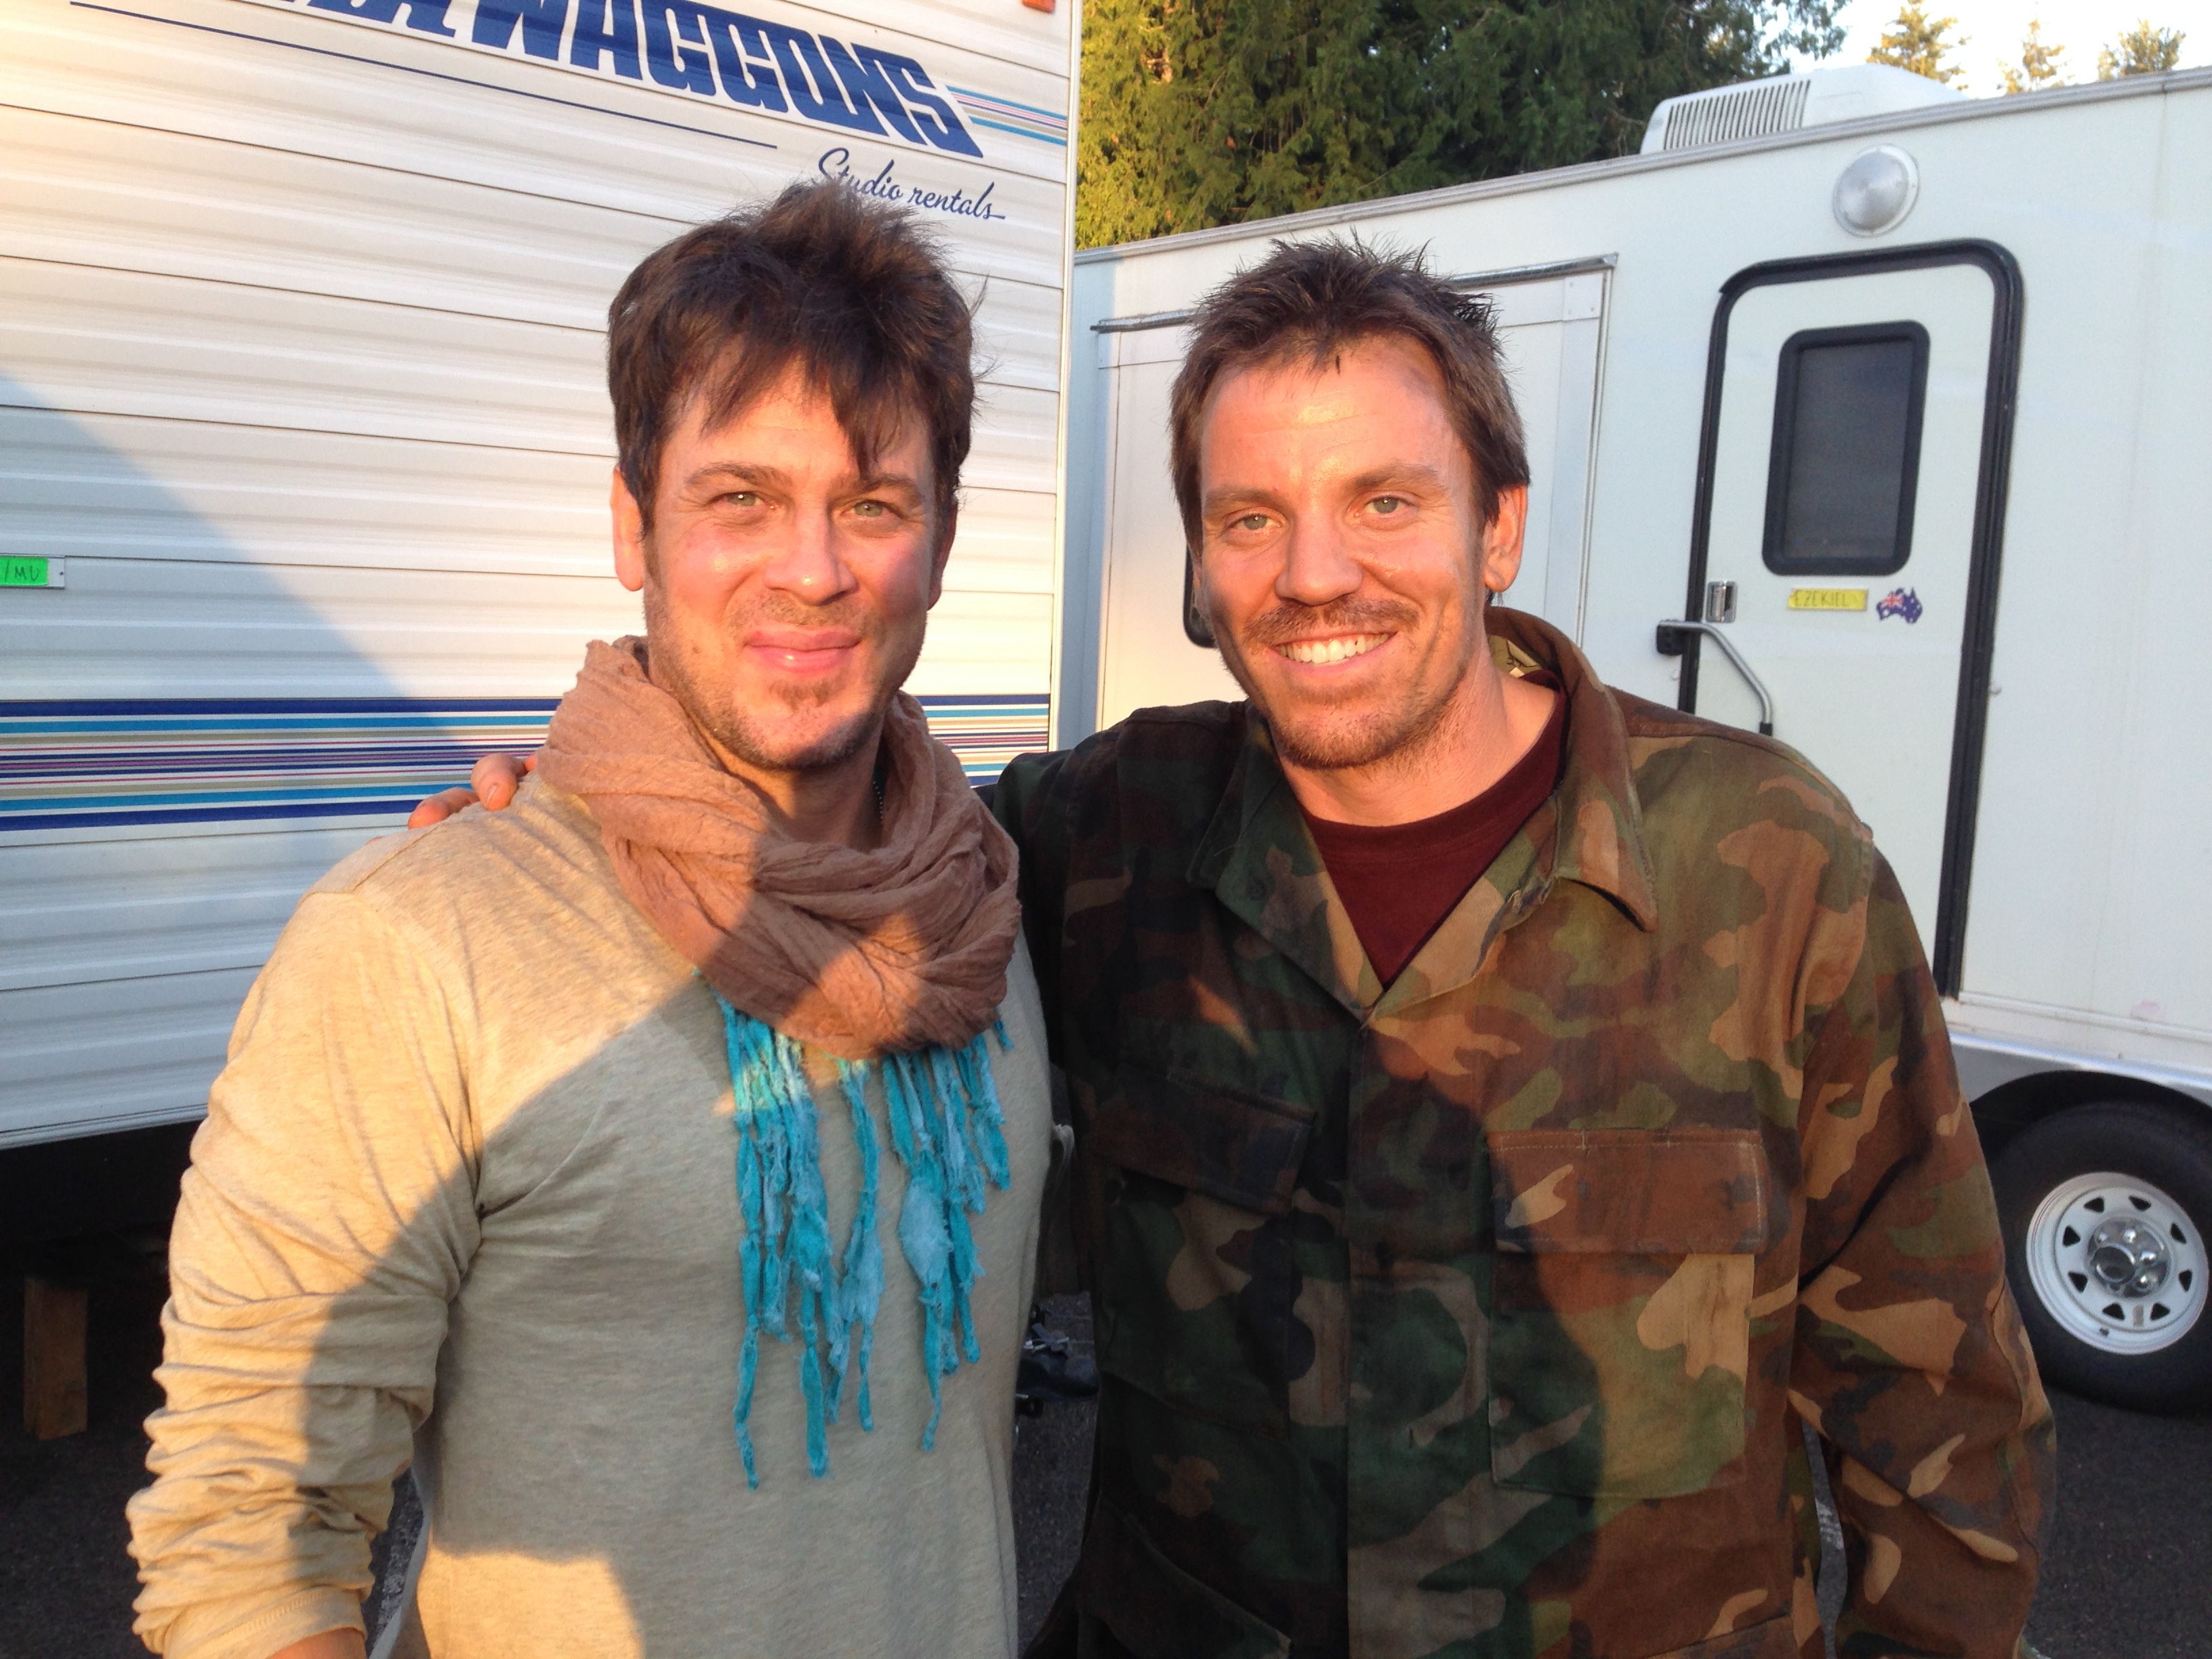 Christian Kane and Mike Pfaff The Librarians